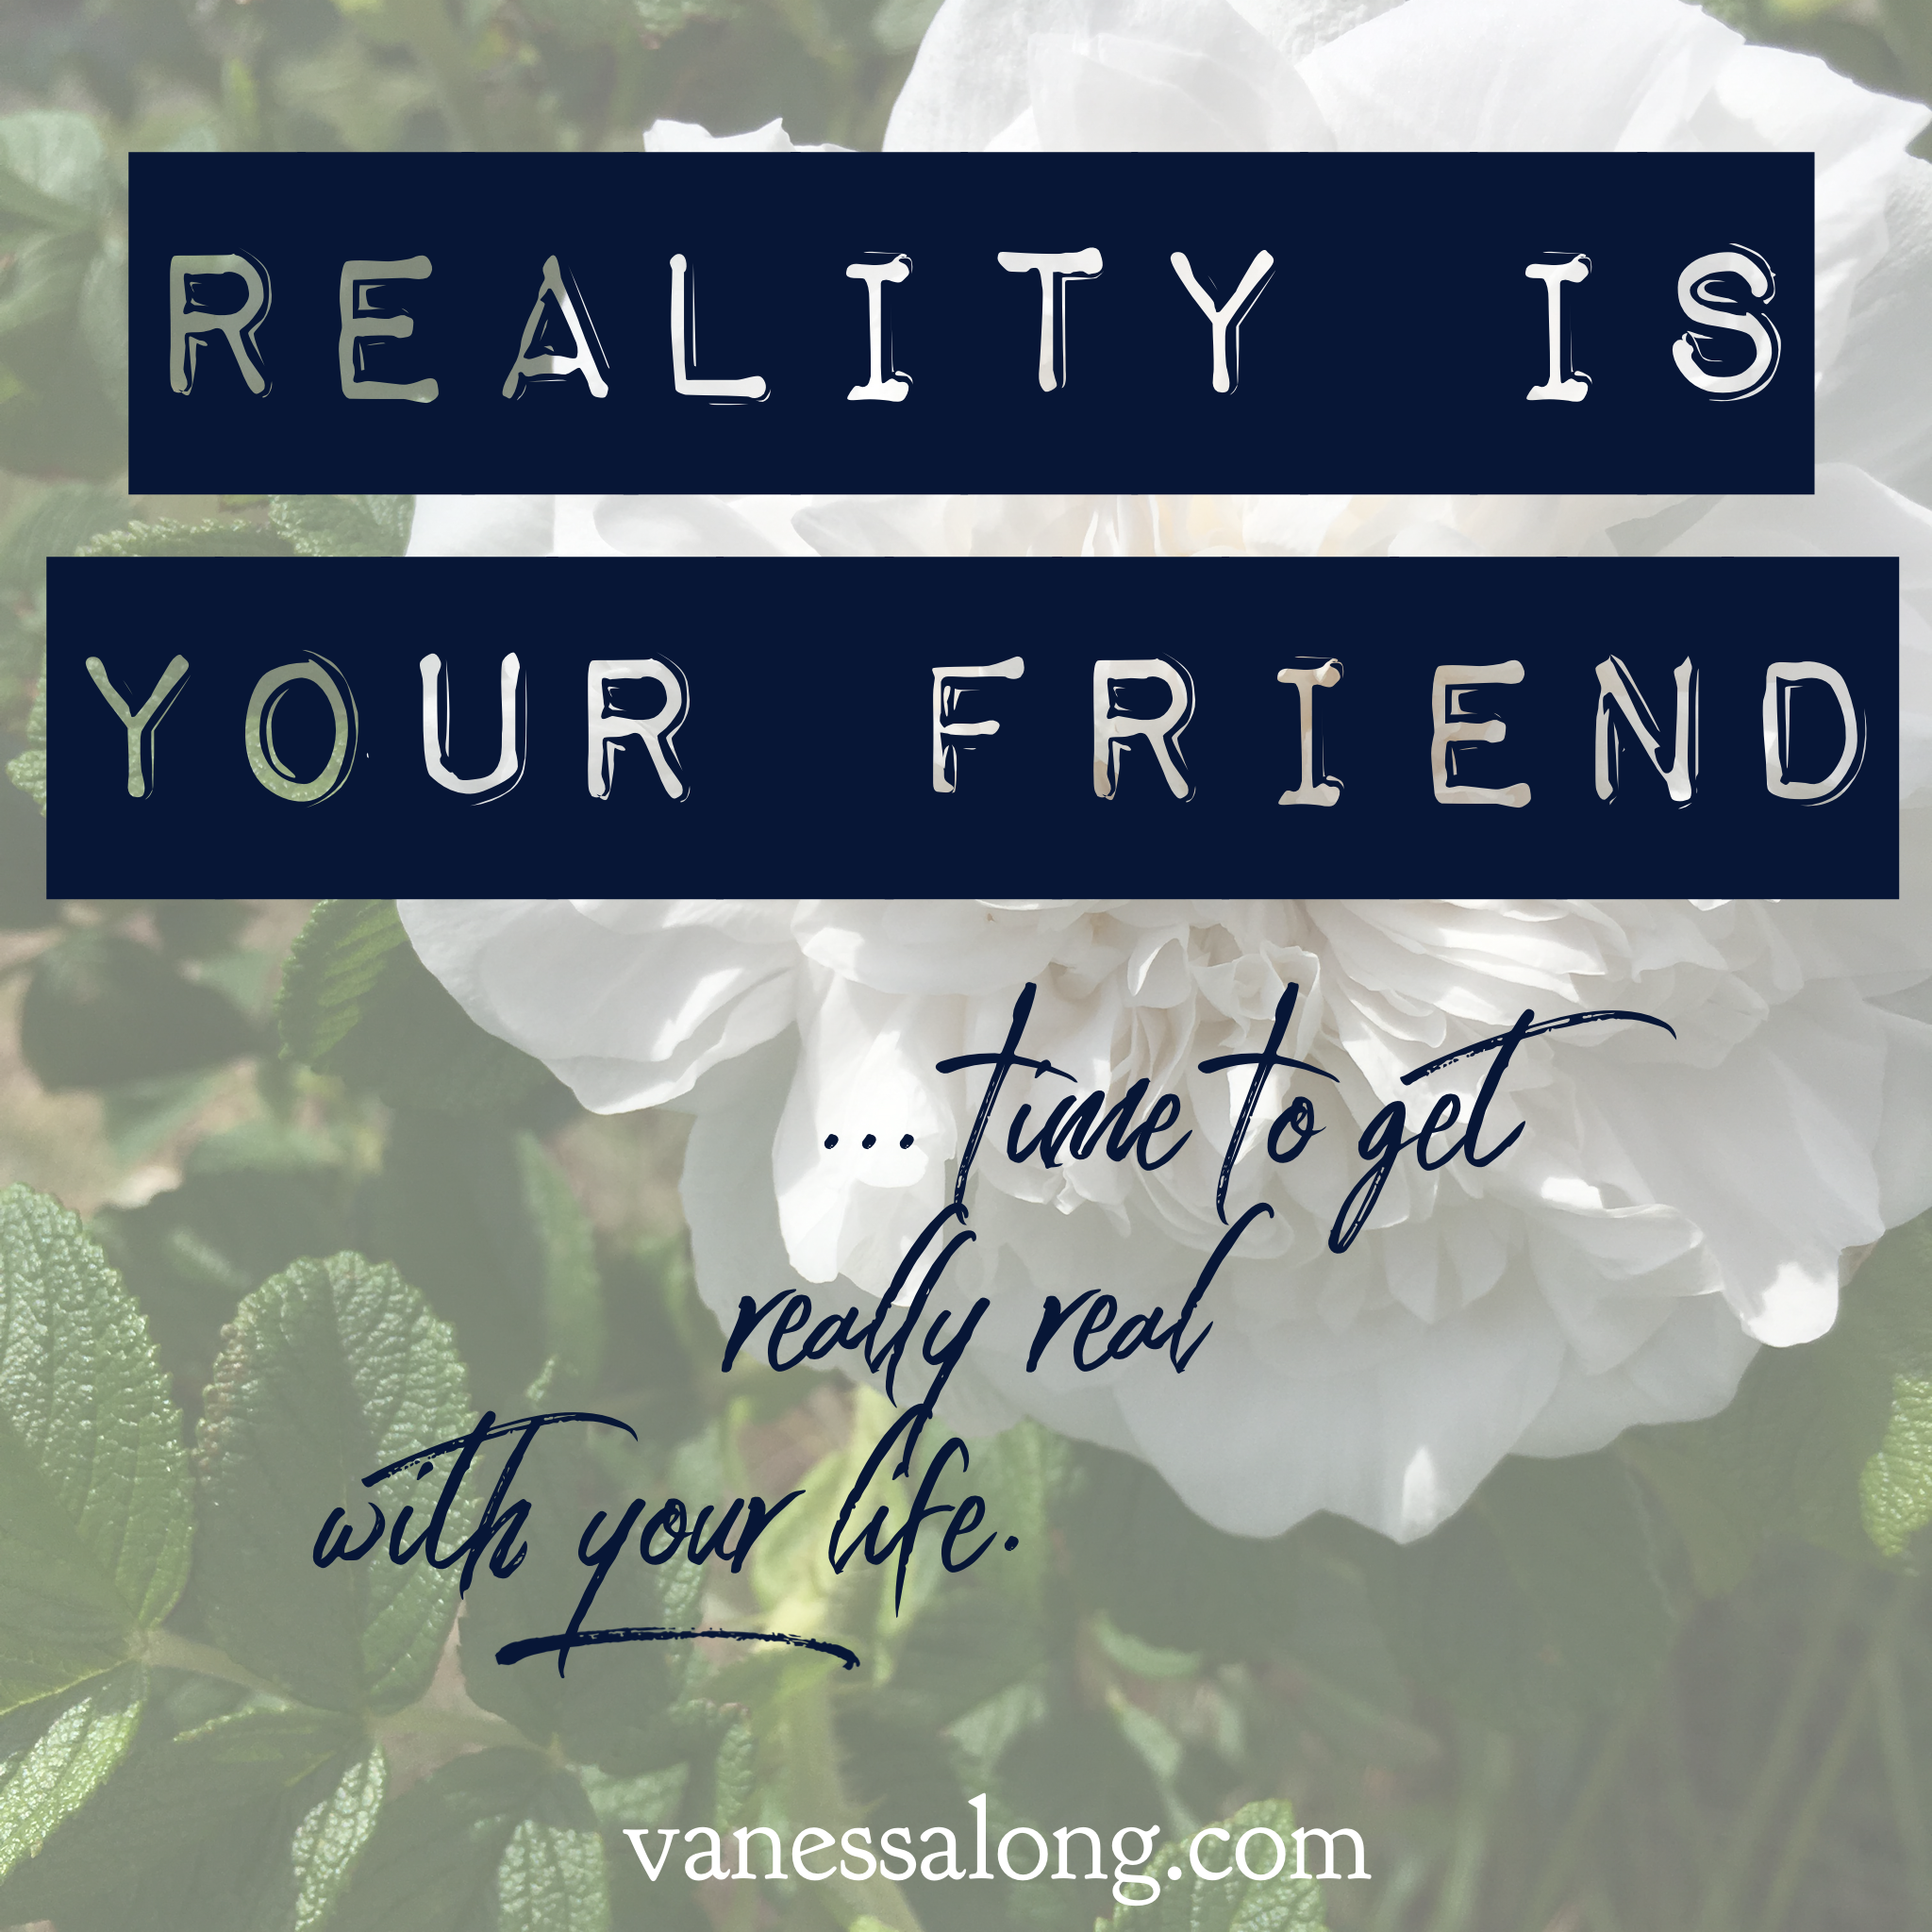 reality is your friend... time to get really real with your life